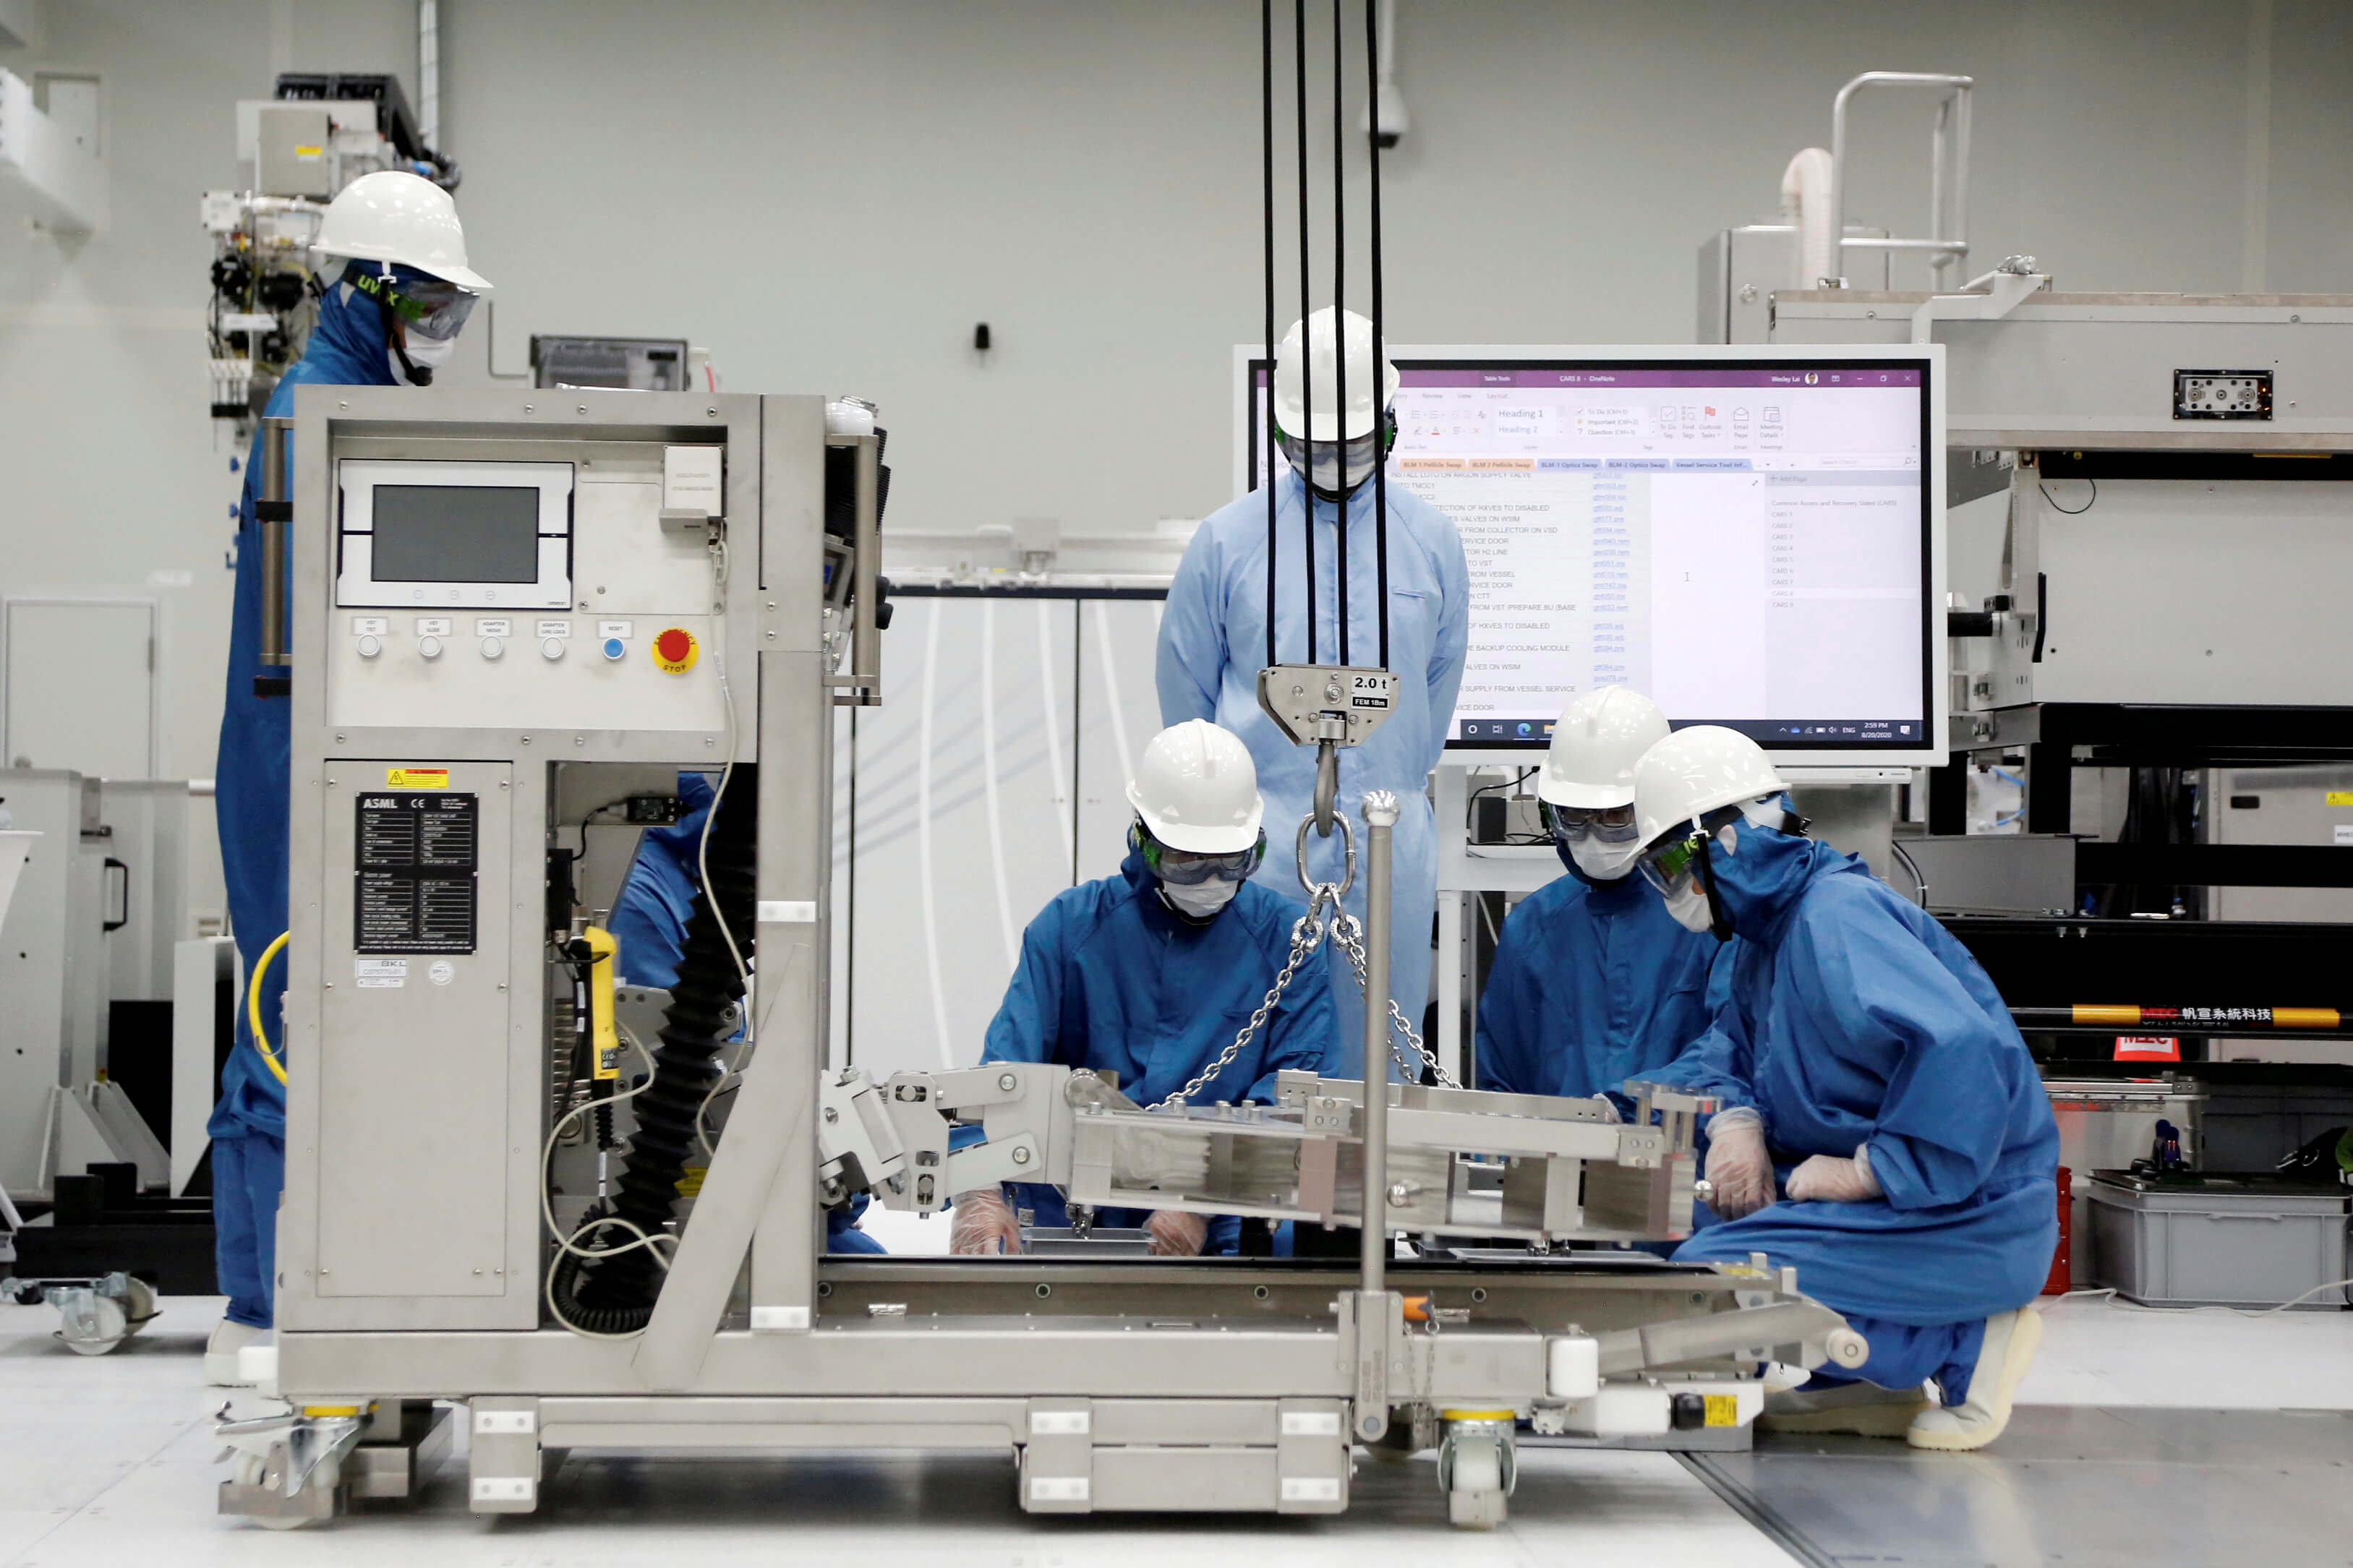 VandeLugtVanderPutten-Trainees learn how to build and operate an EUV machine at the training center at ASML Holding in Tainan, Taiwan, August 20, 2020. REUTERS